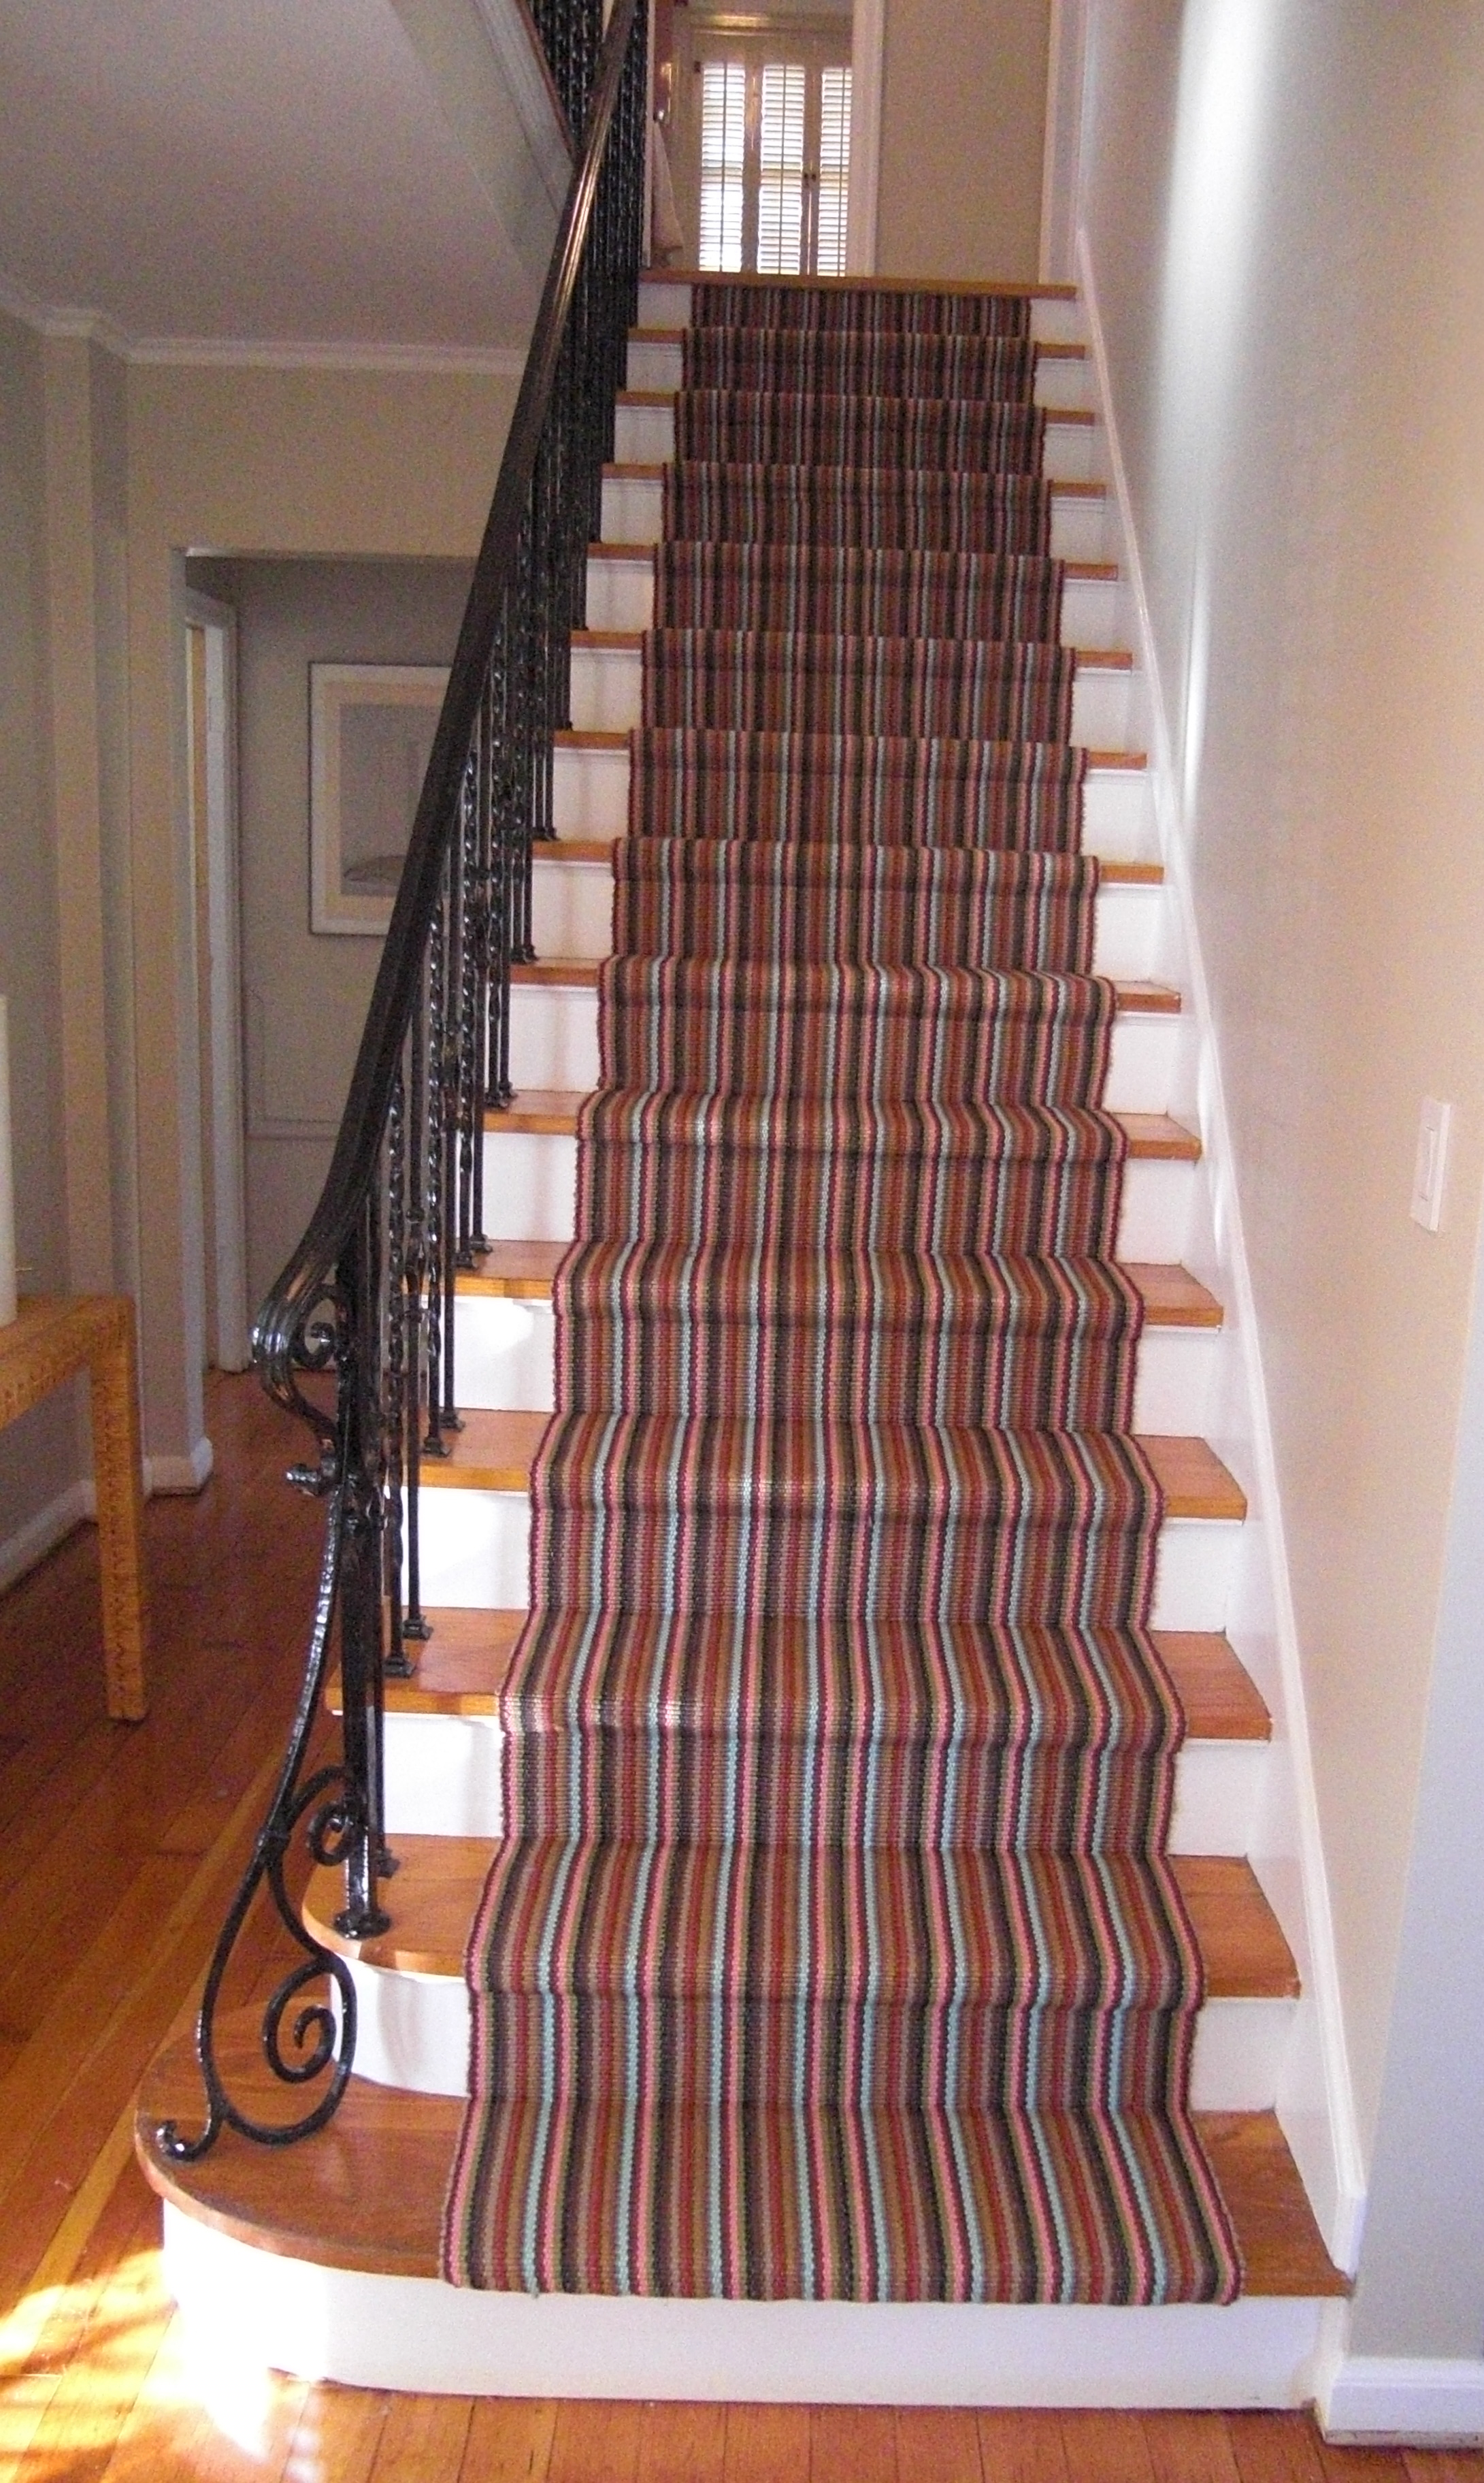 carpet runners for stairs montreal photo - 1